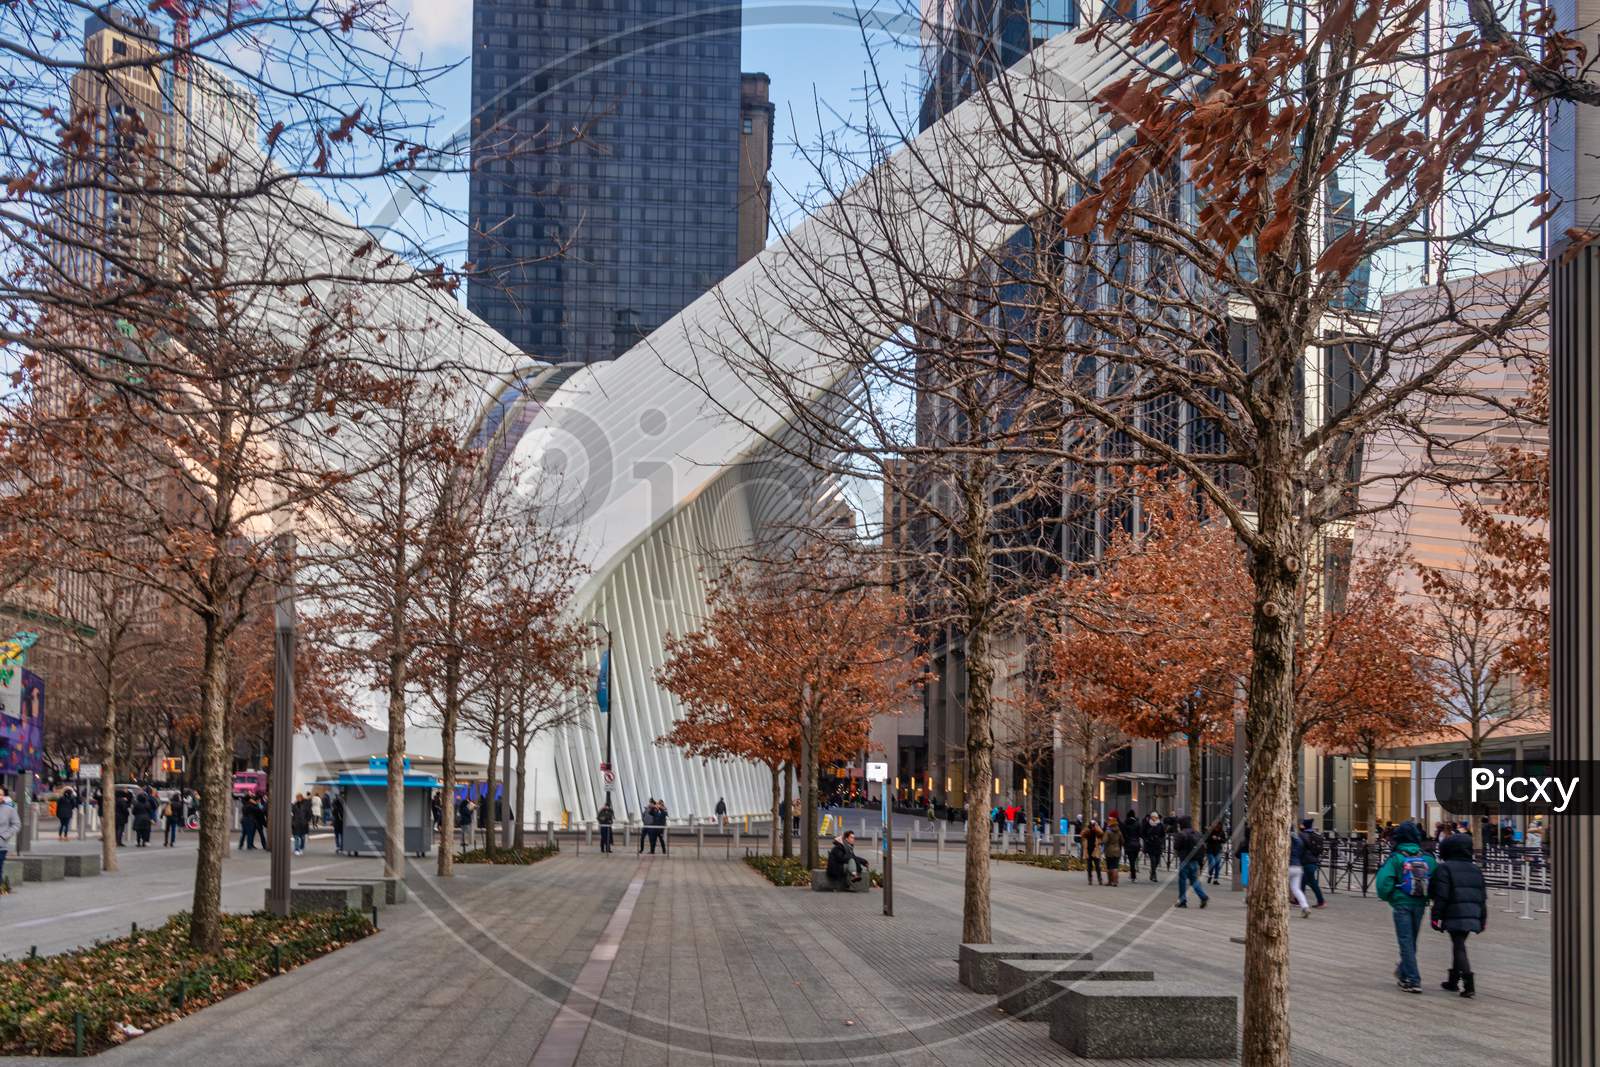 World Trade Center Transportation Hub ( Oculus)  in NYC Financial District day light view  with trees and people walking